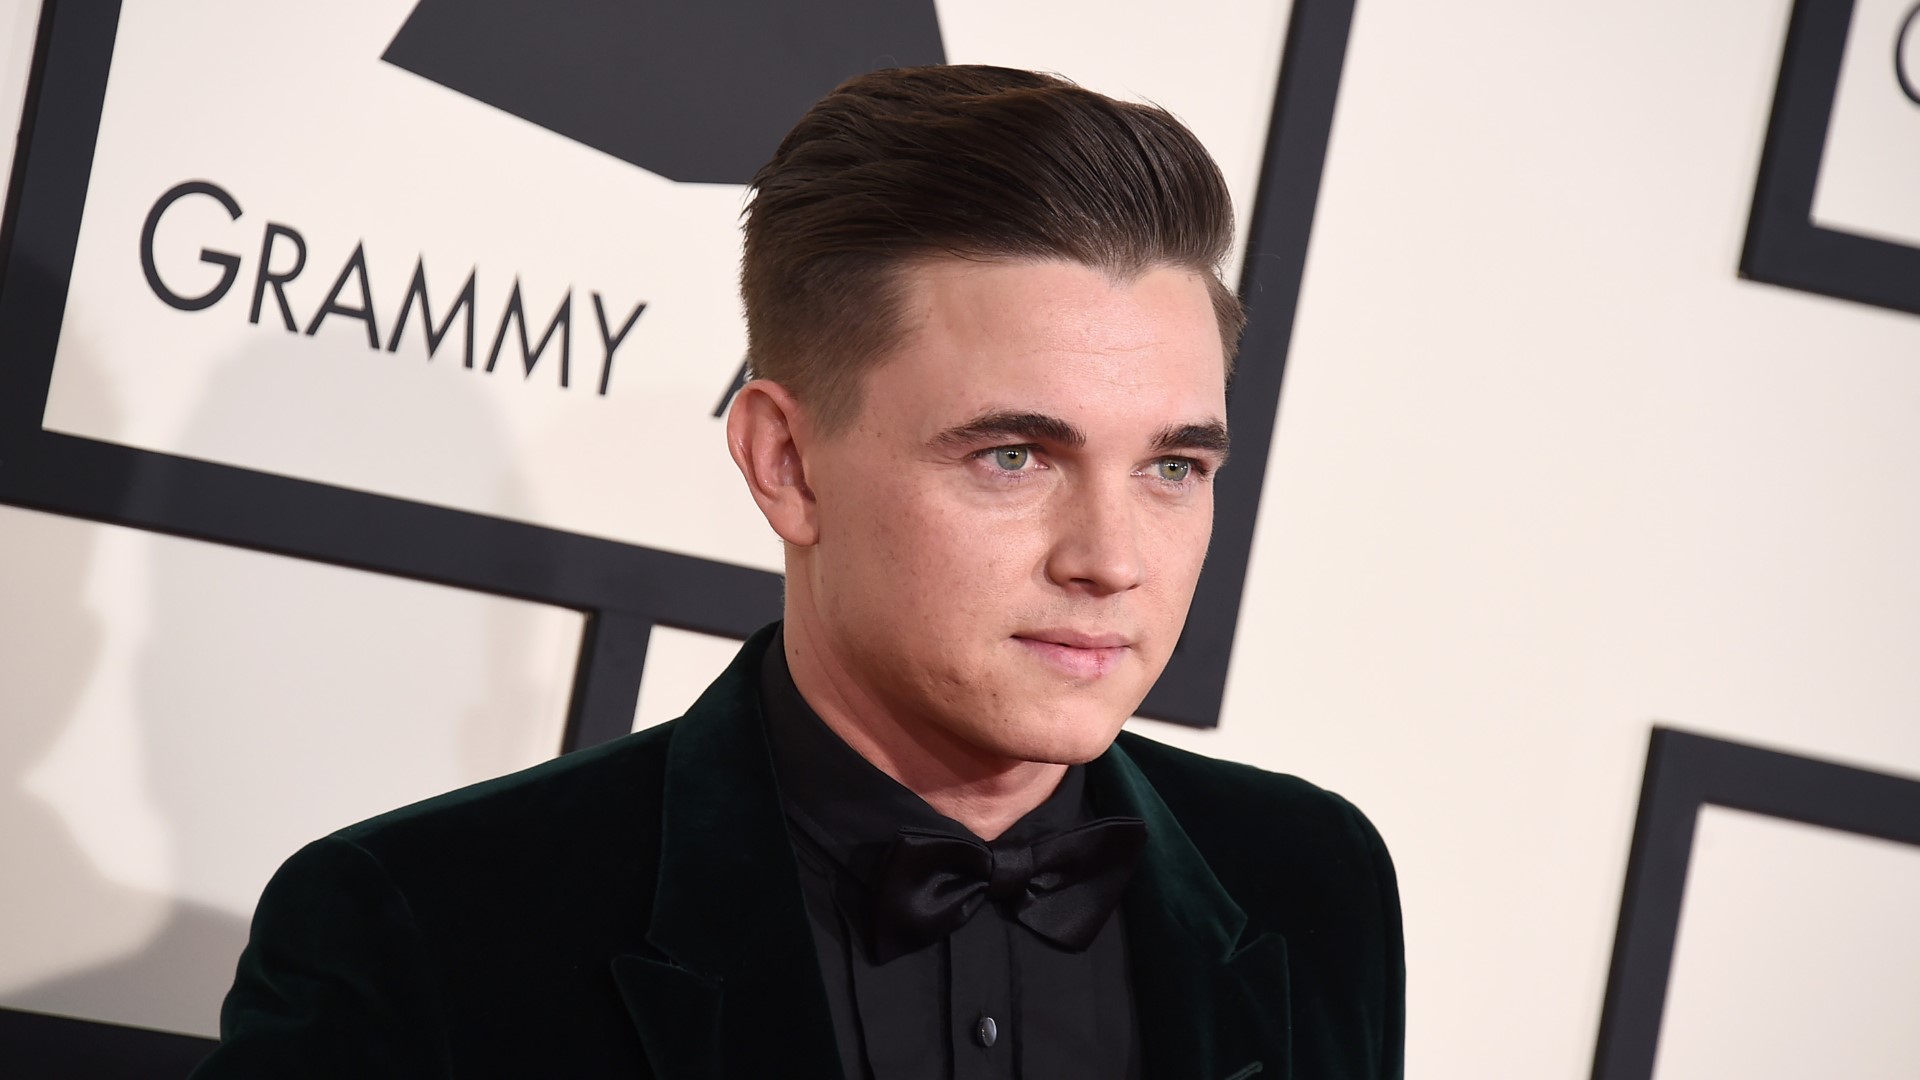 The acts announced Wednesday include pop singer Jesse McCartney and country music singer-songwriter Travis Tritt.